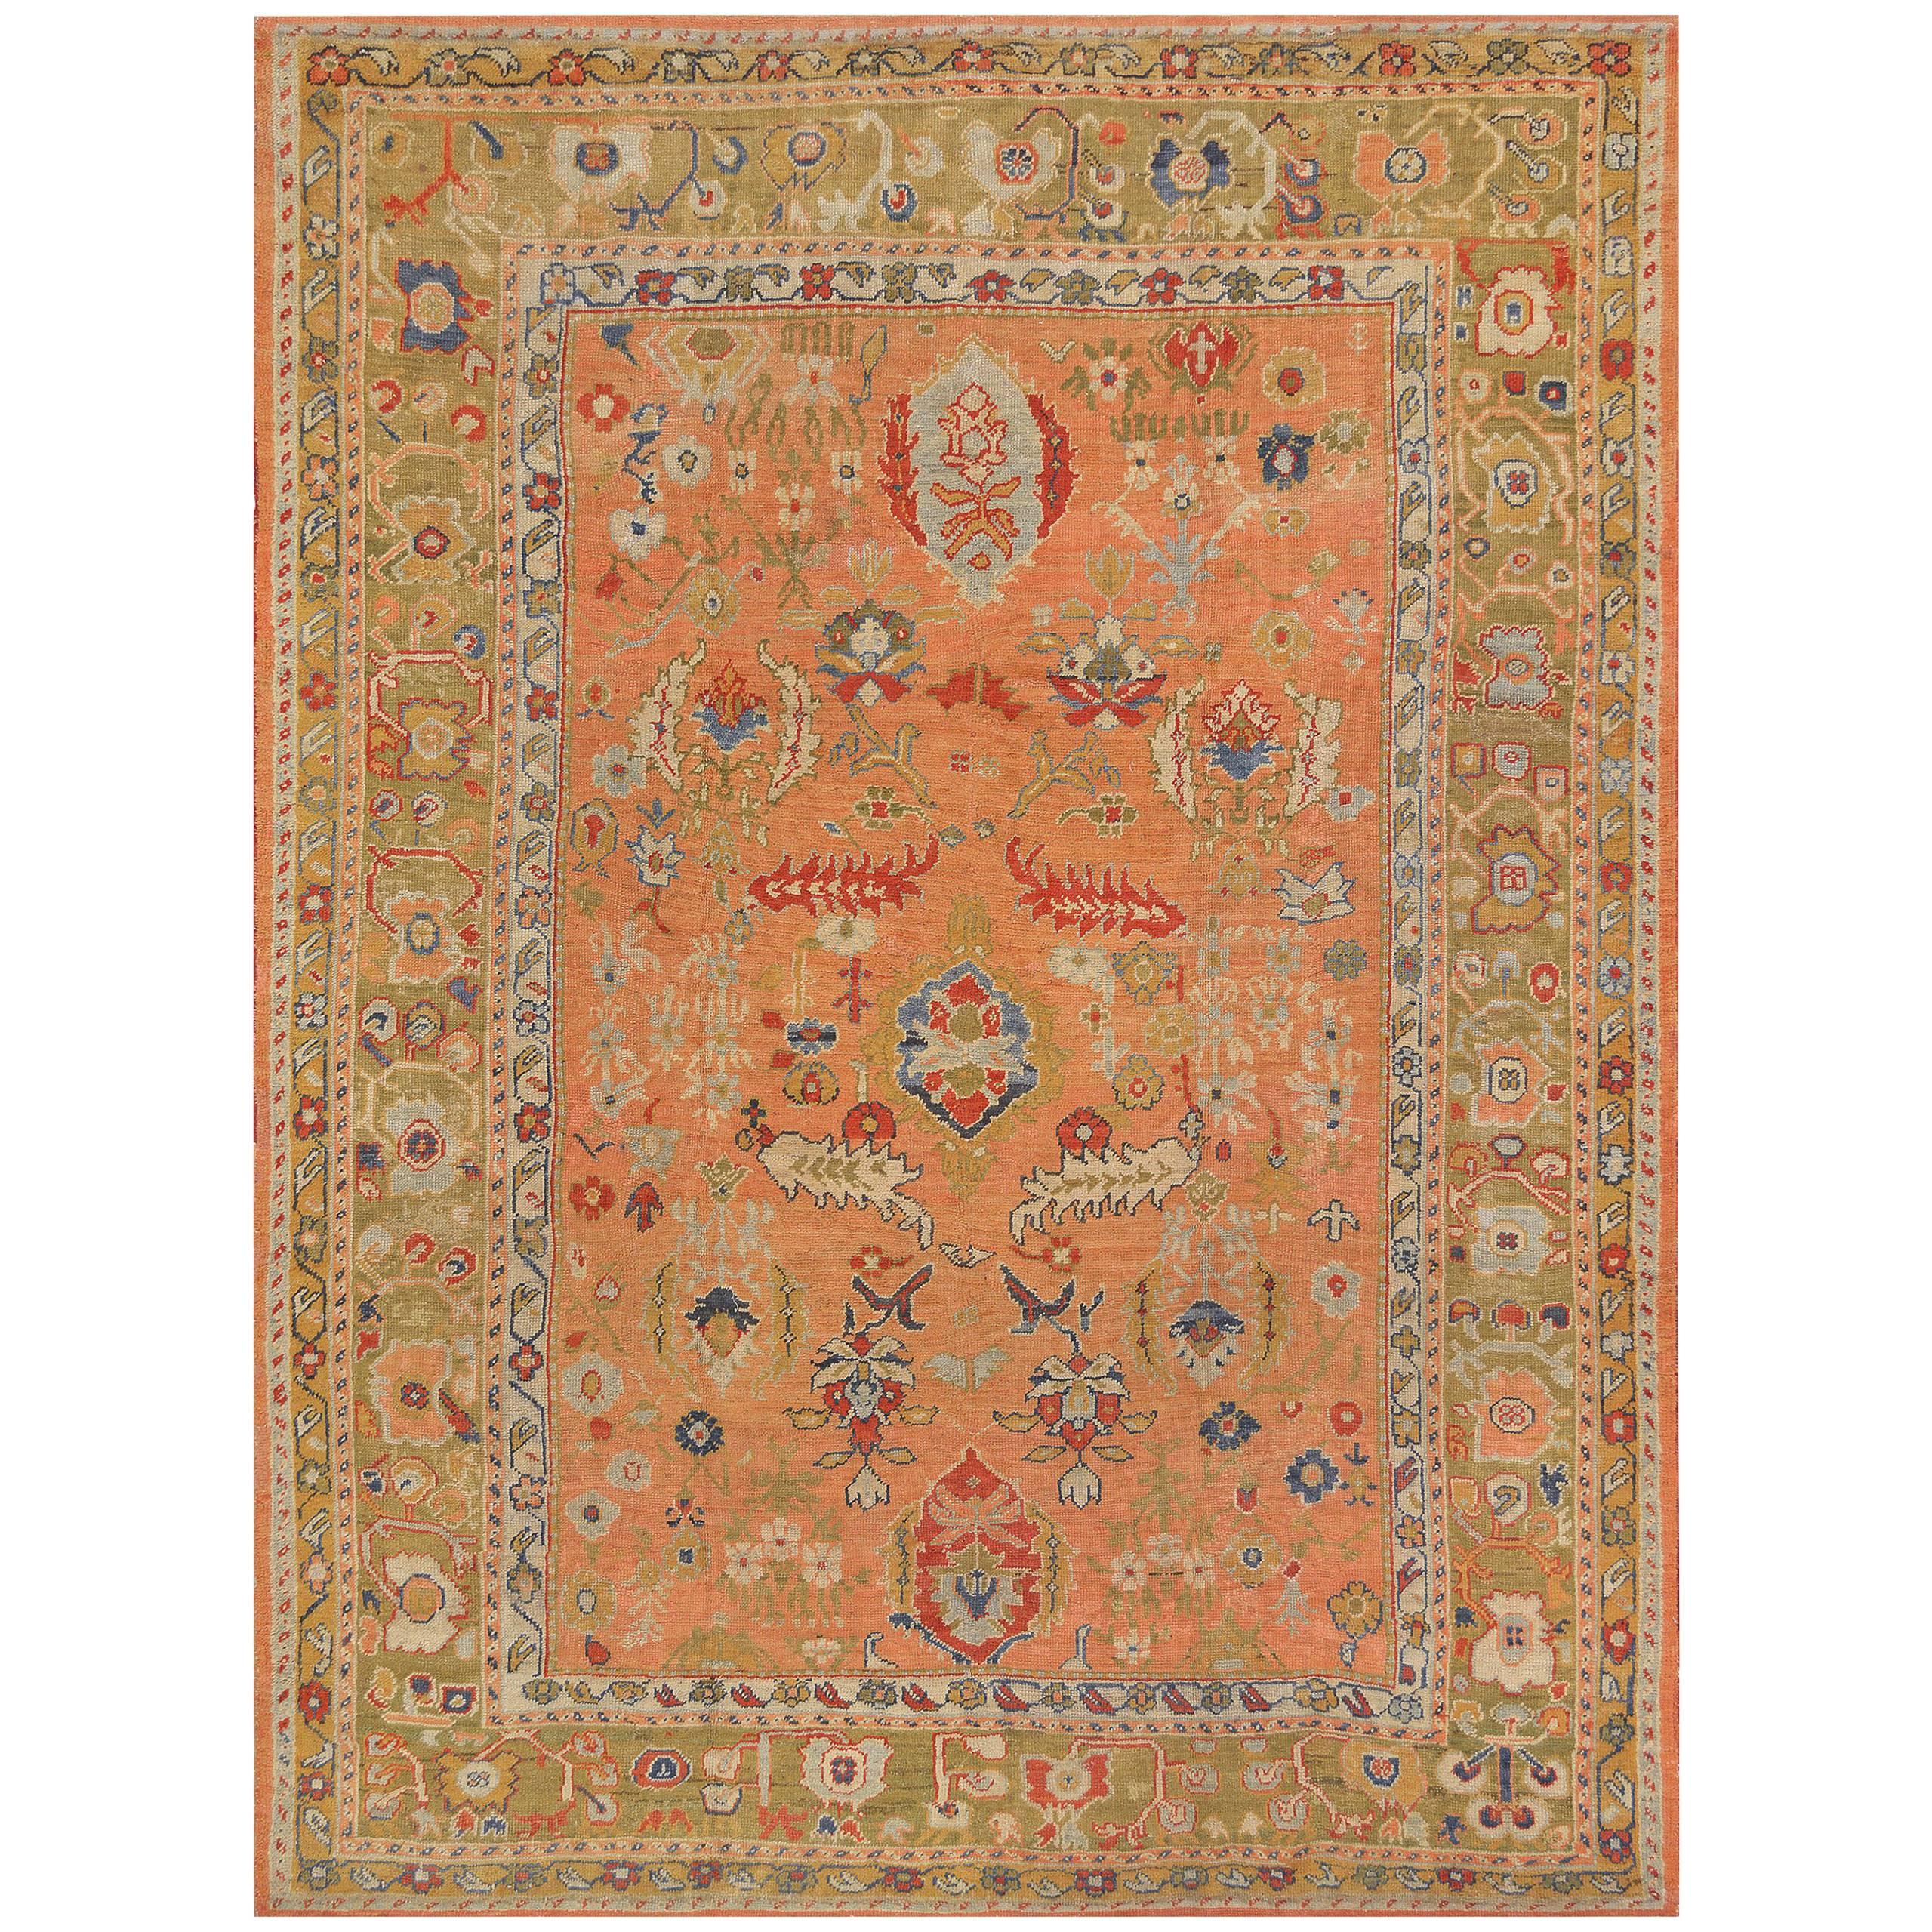 Late 19th Century Oushak Rug from Turkey